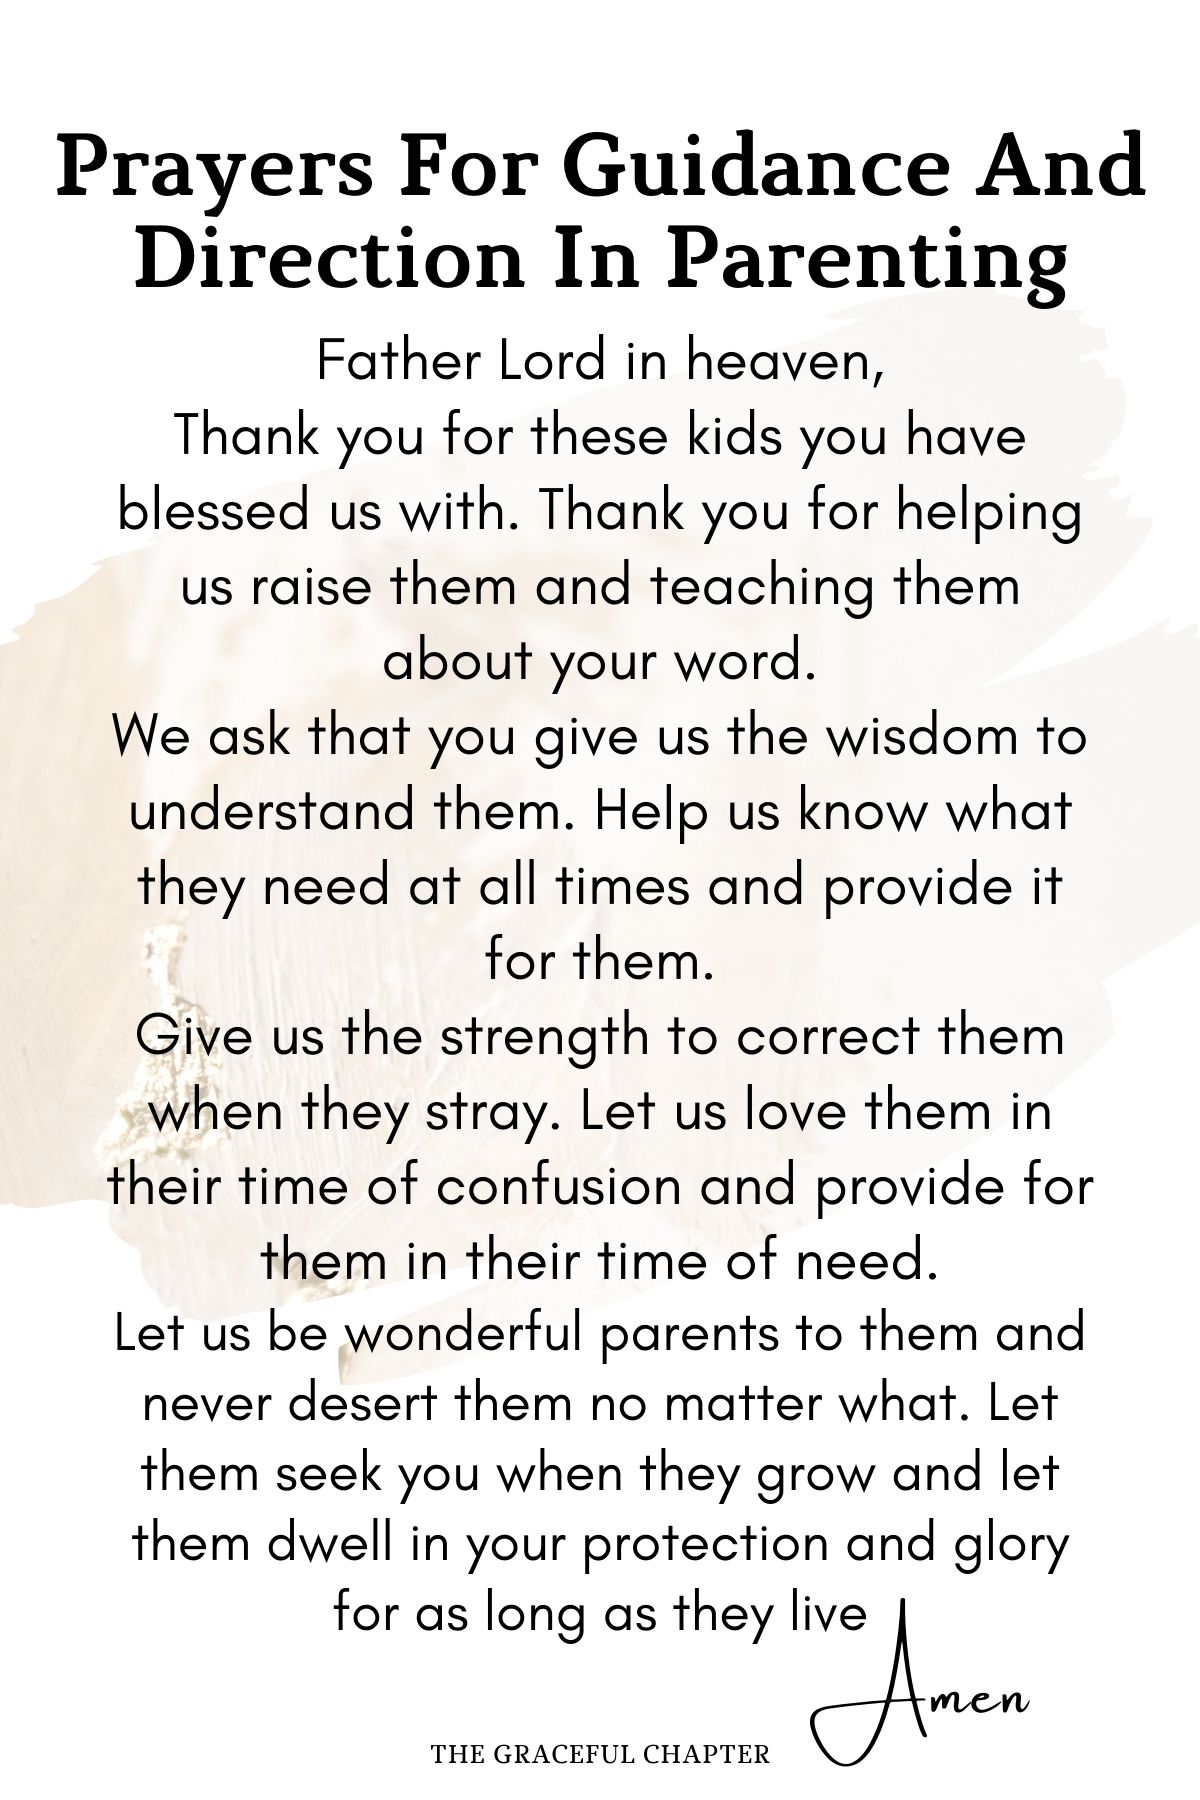 Prayers for guidance and direction during parenting